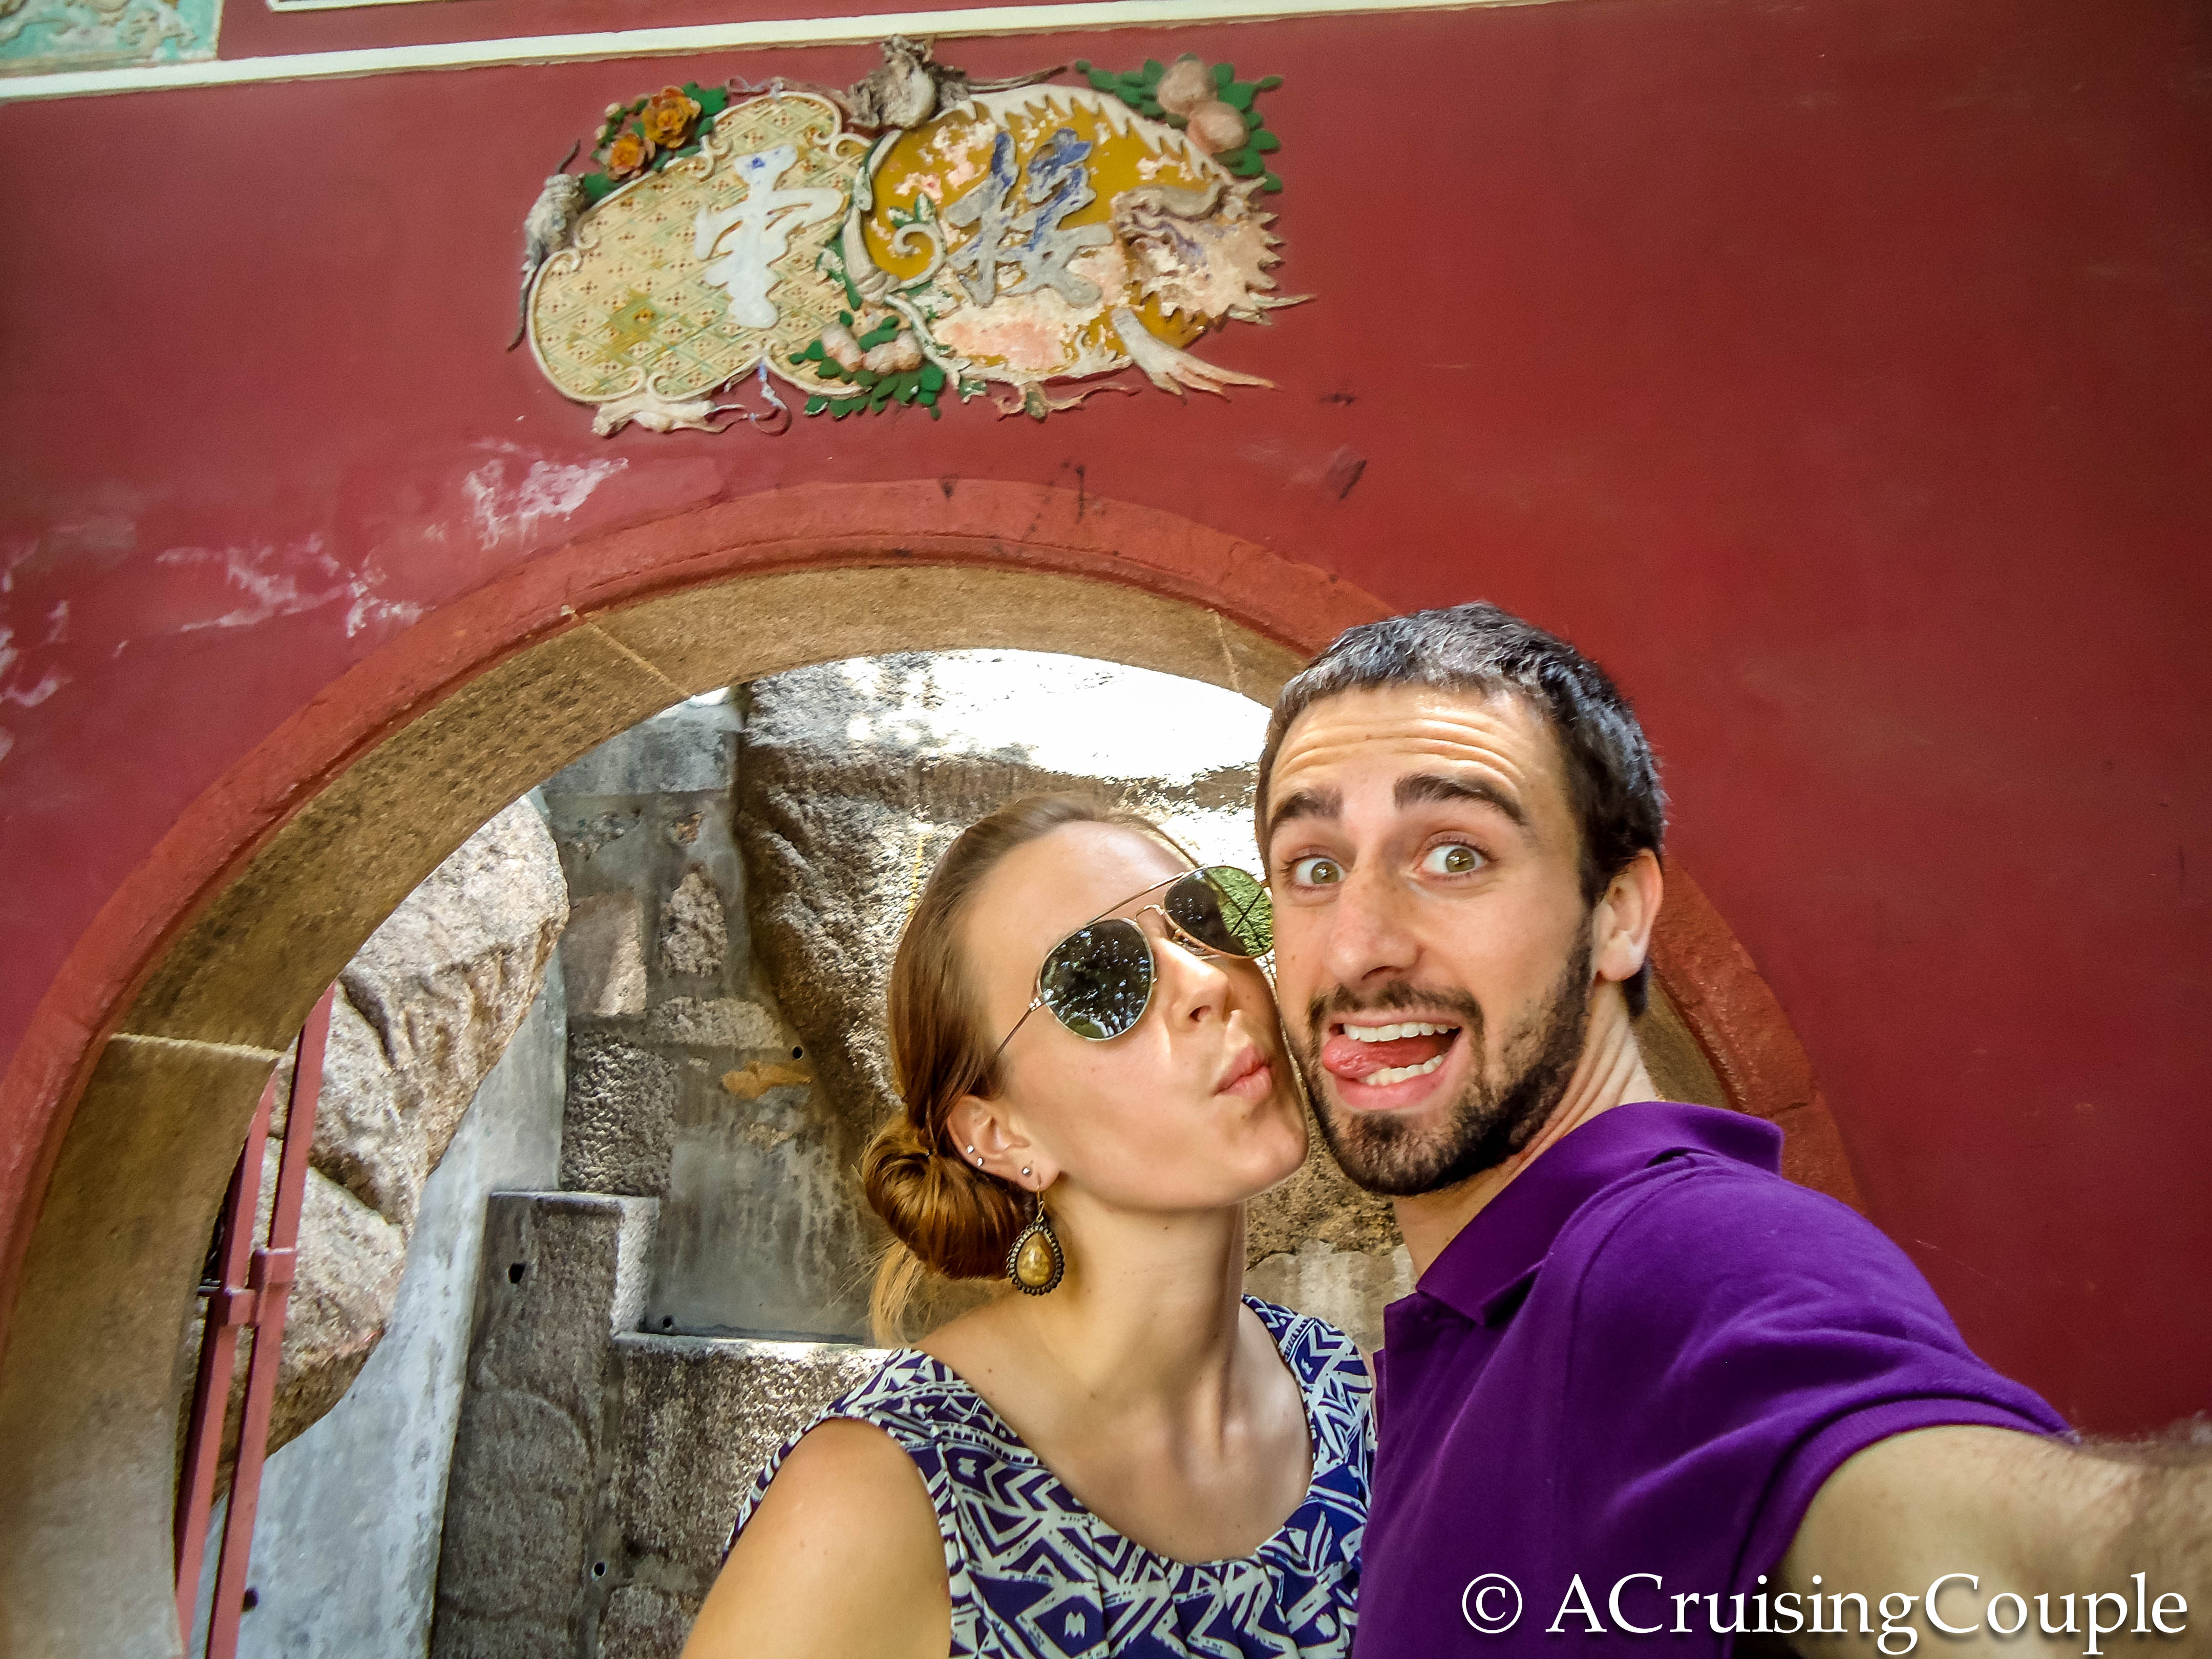 10 Ways to Keep the Love Alive on the Road – Tips for Traveling Couples